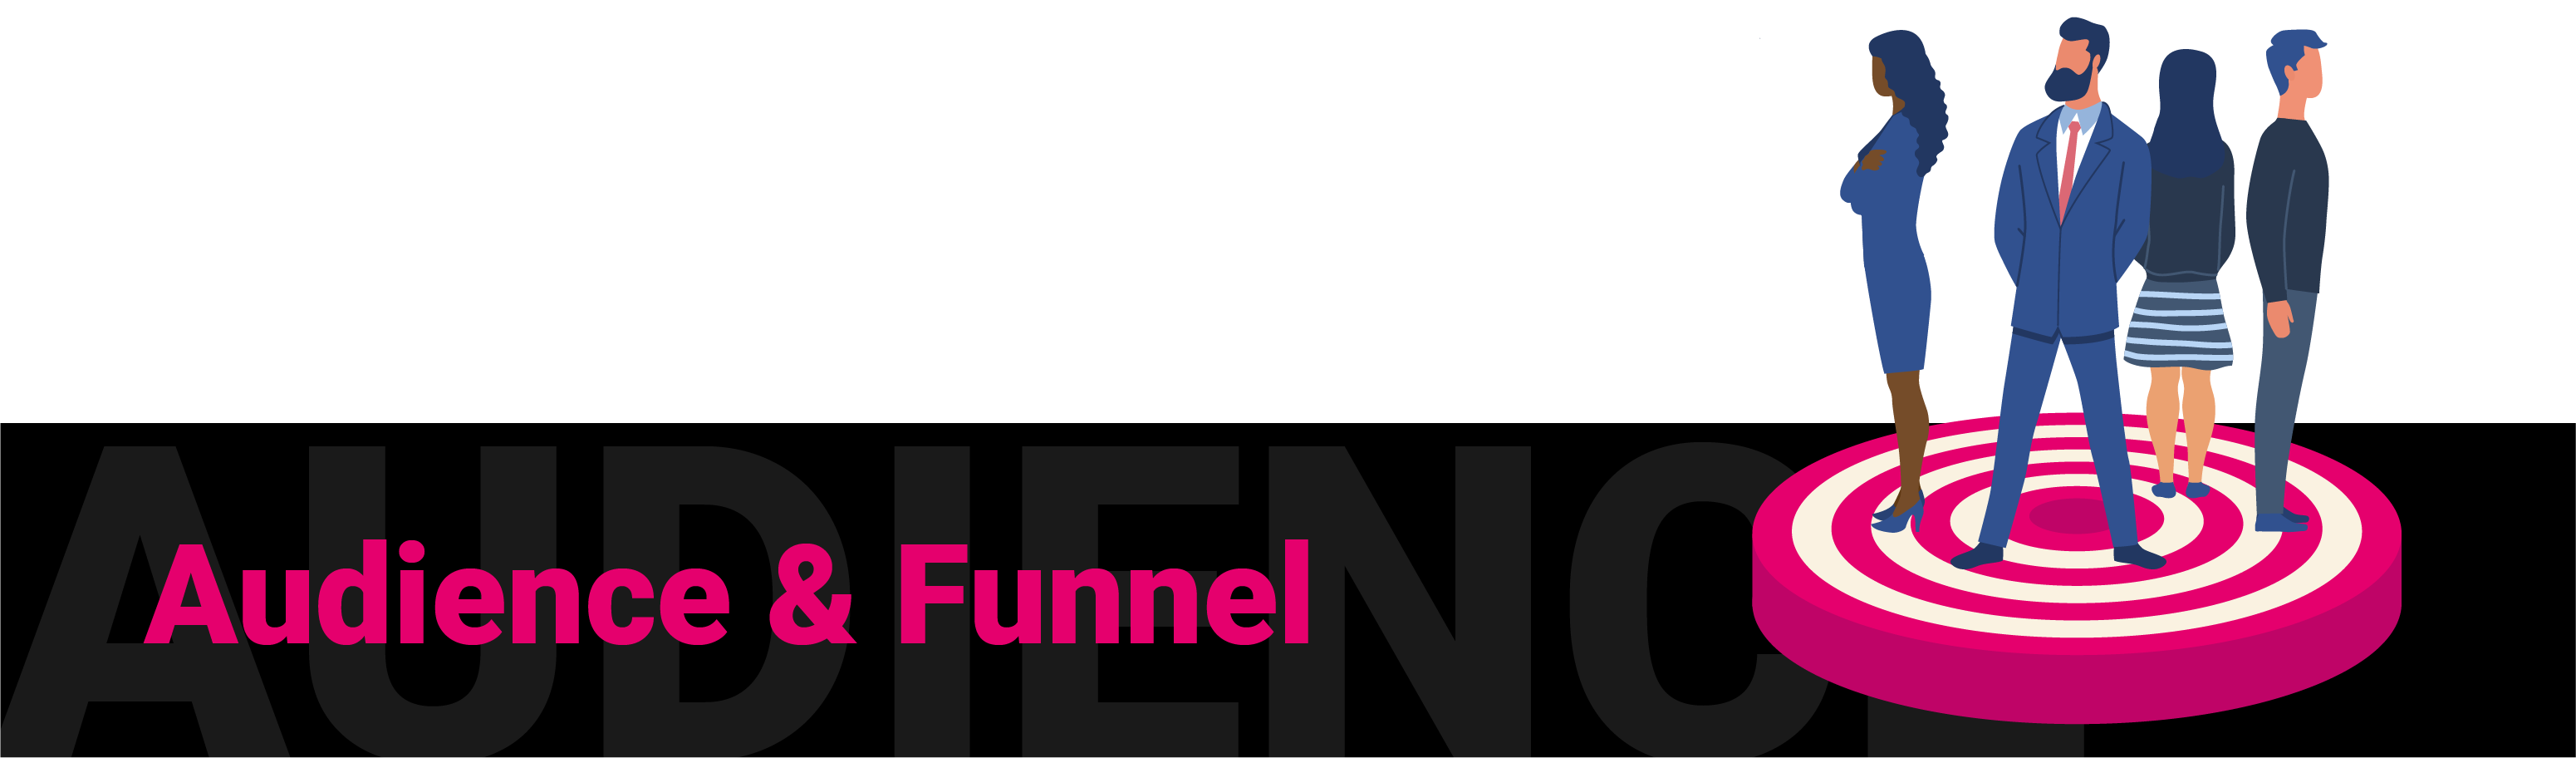 Audience & Funnel 